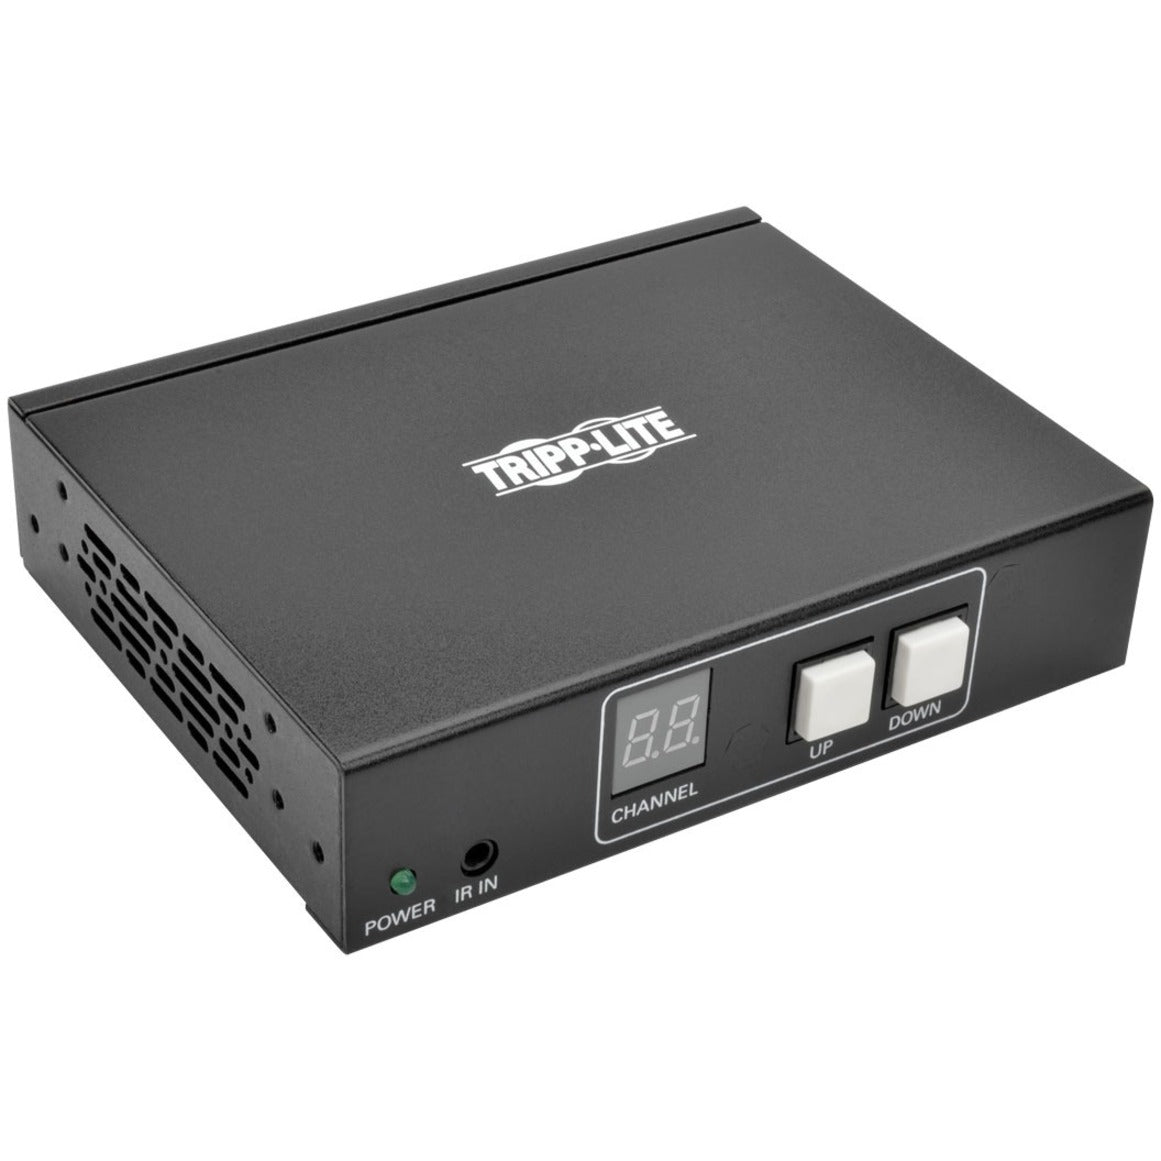 Tripp Lite B160-100-HDSI Video Extender Receiver, HDMI Audio/Video with RS-232 Serial